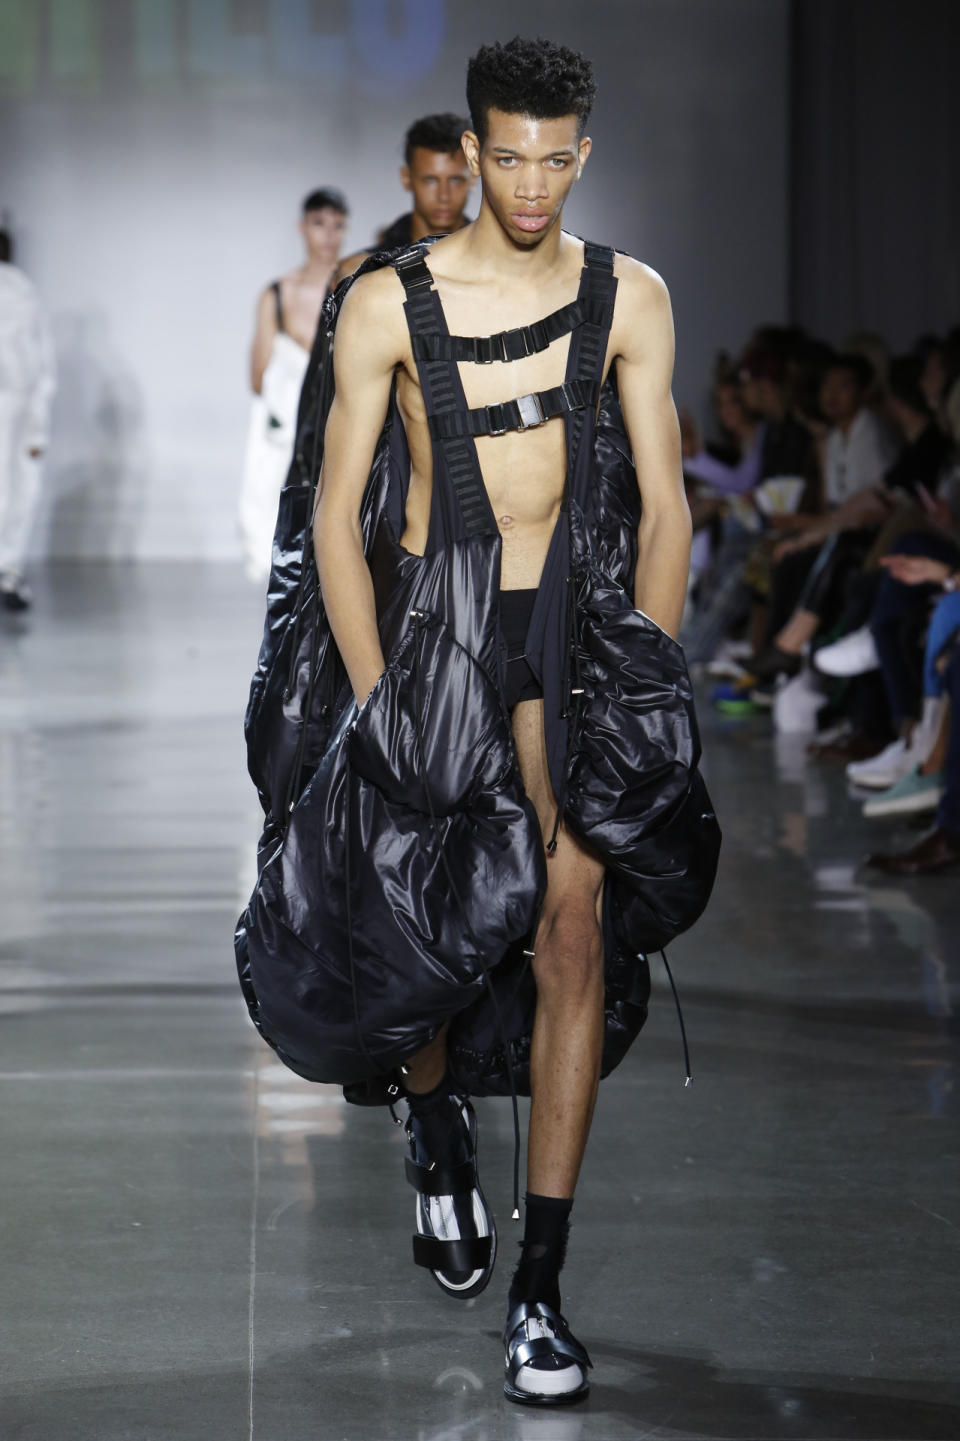 Parachute Harness Top With Short Shorts by Feng Chen Wen